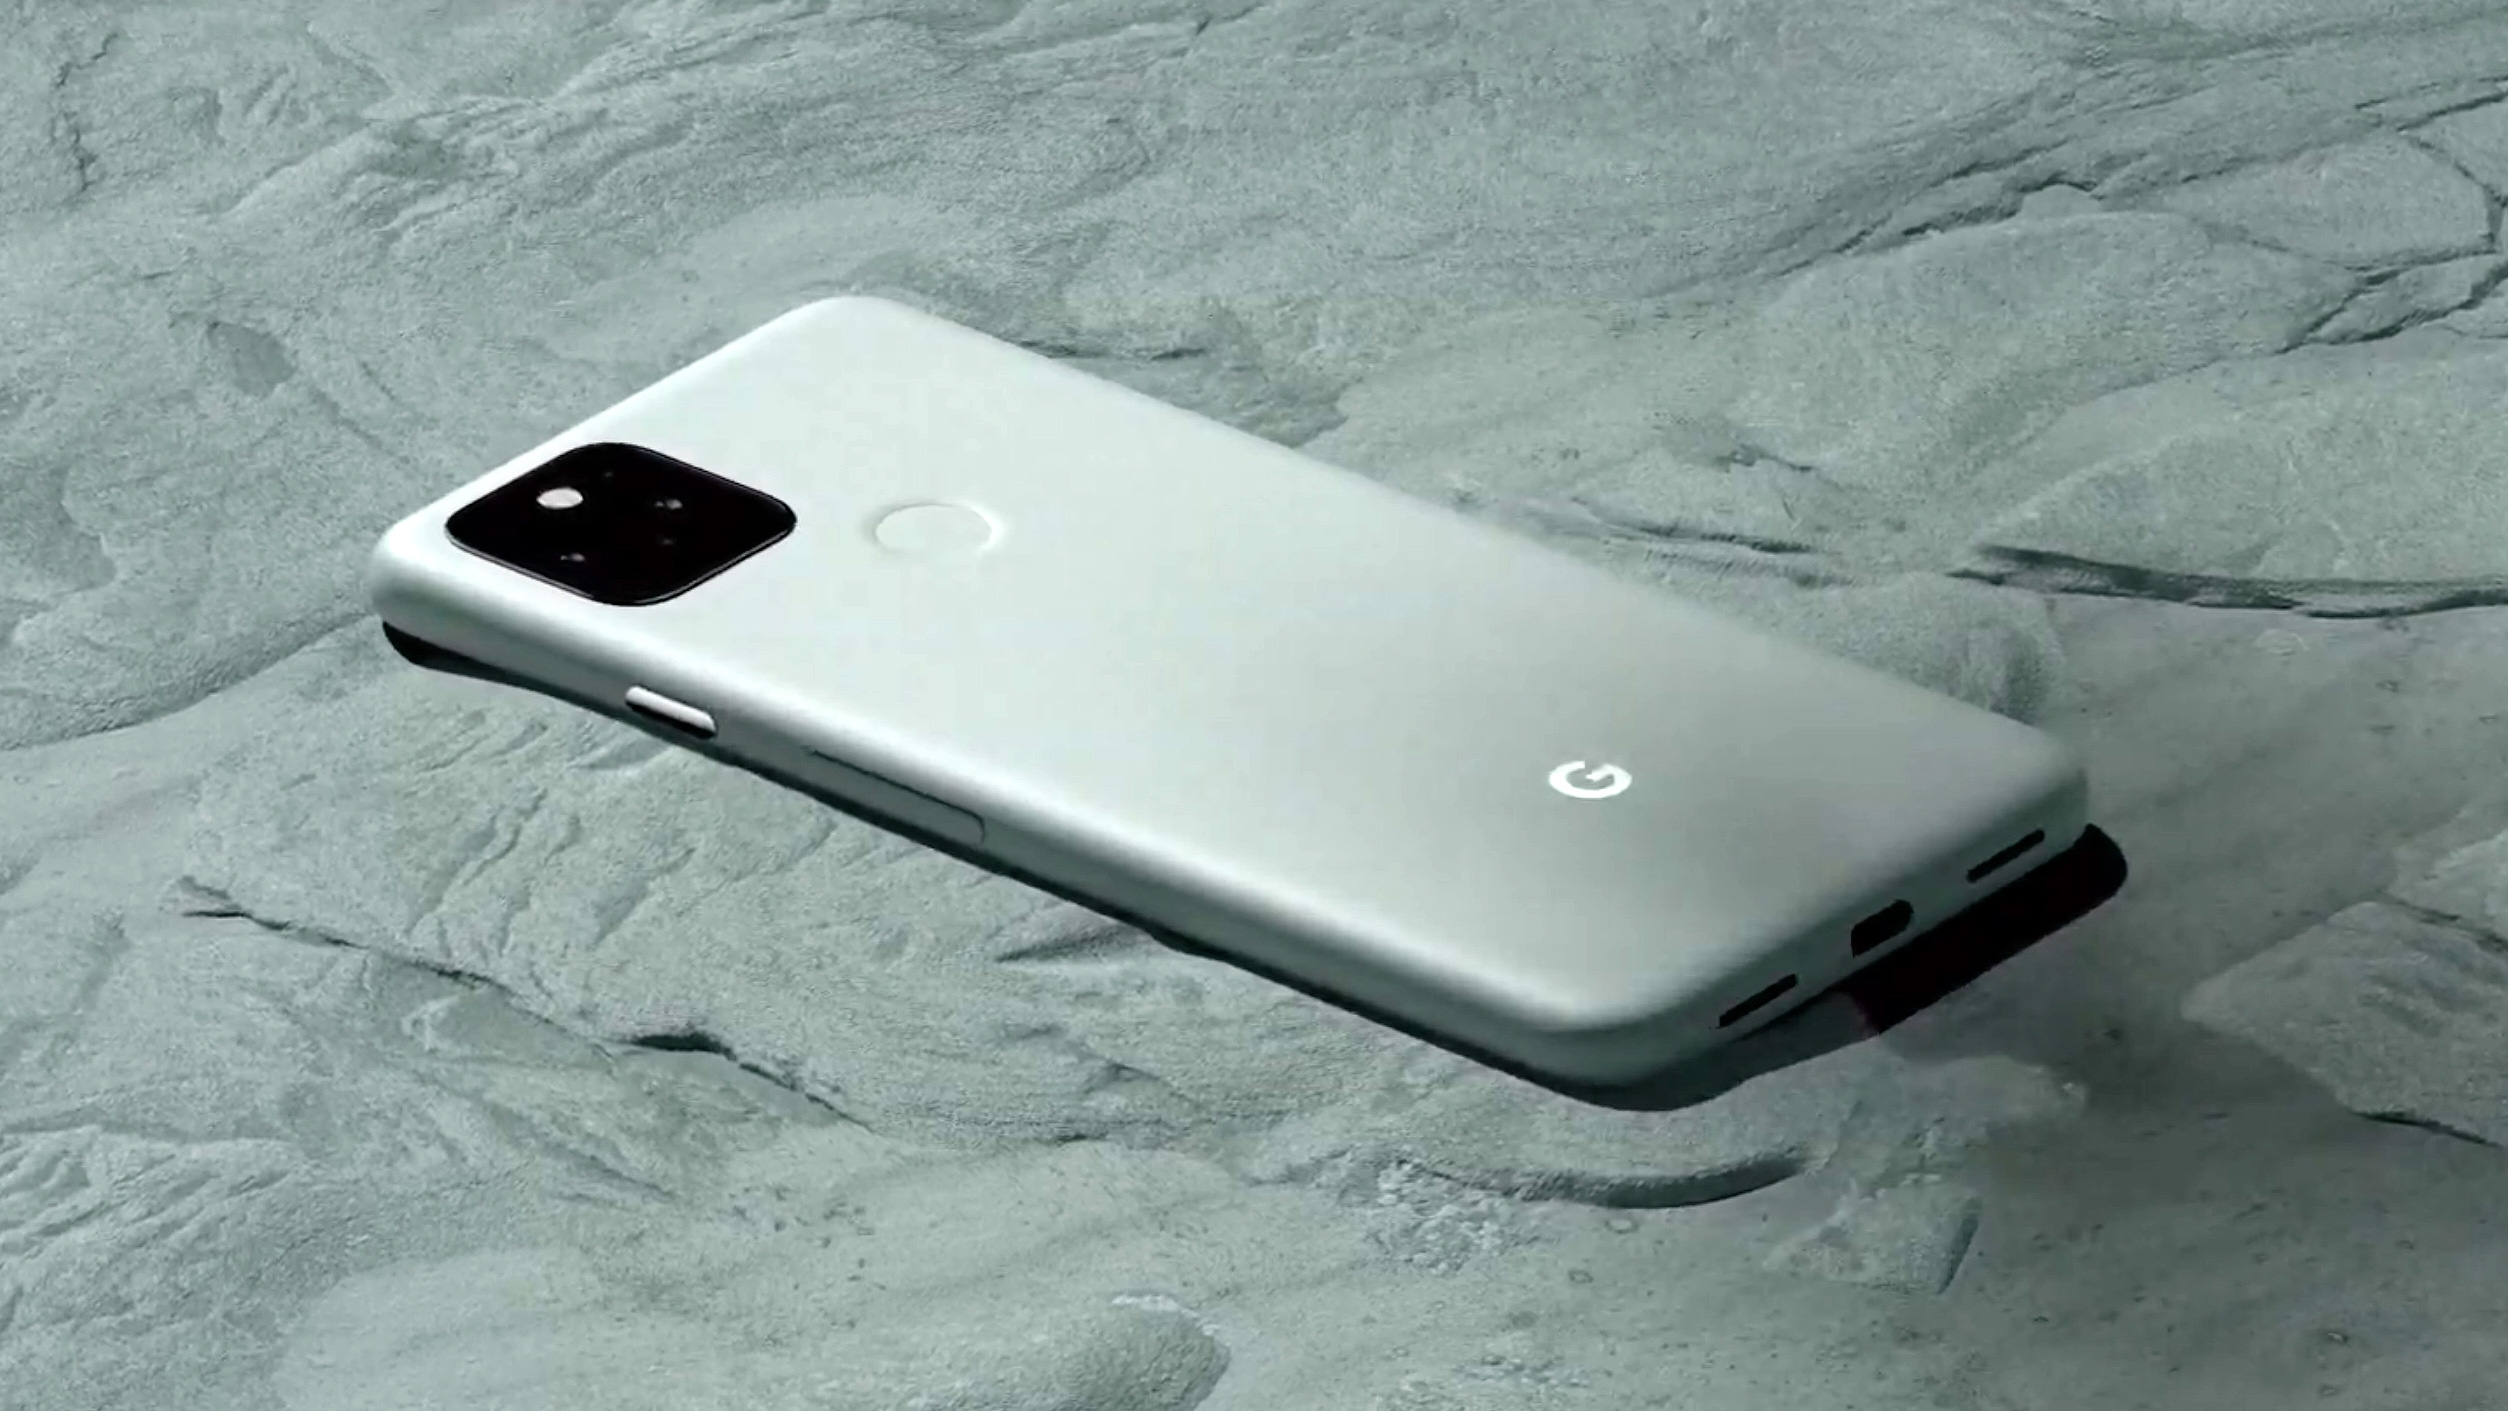 Google Pixel 5 vs. Pixel 4a 5G: What's different? | Tom's Guide